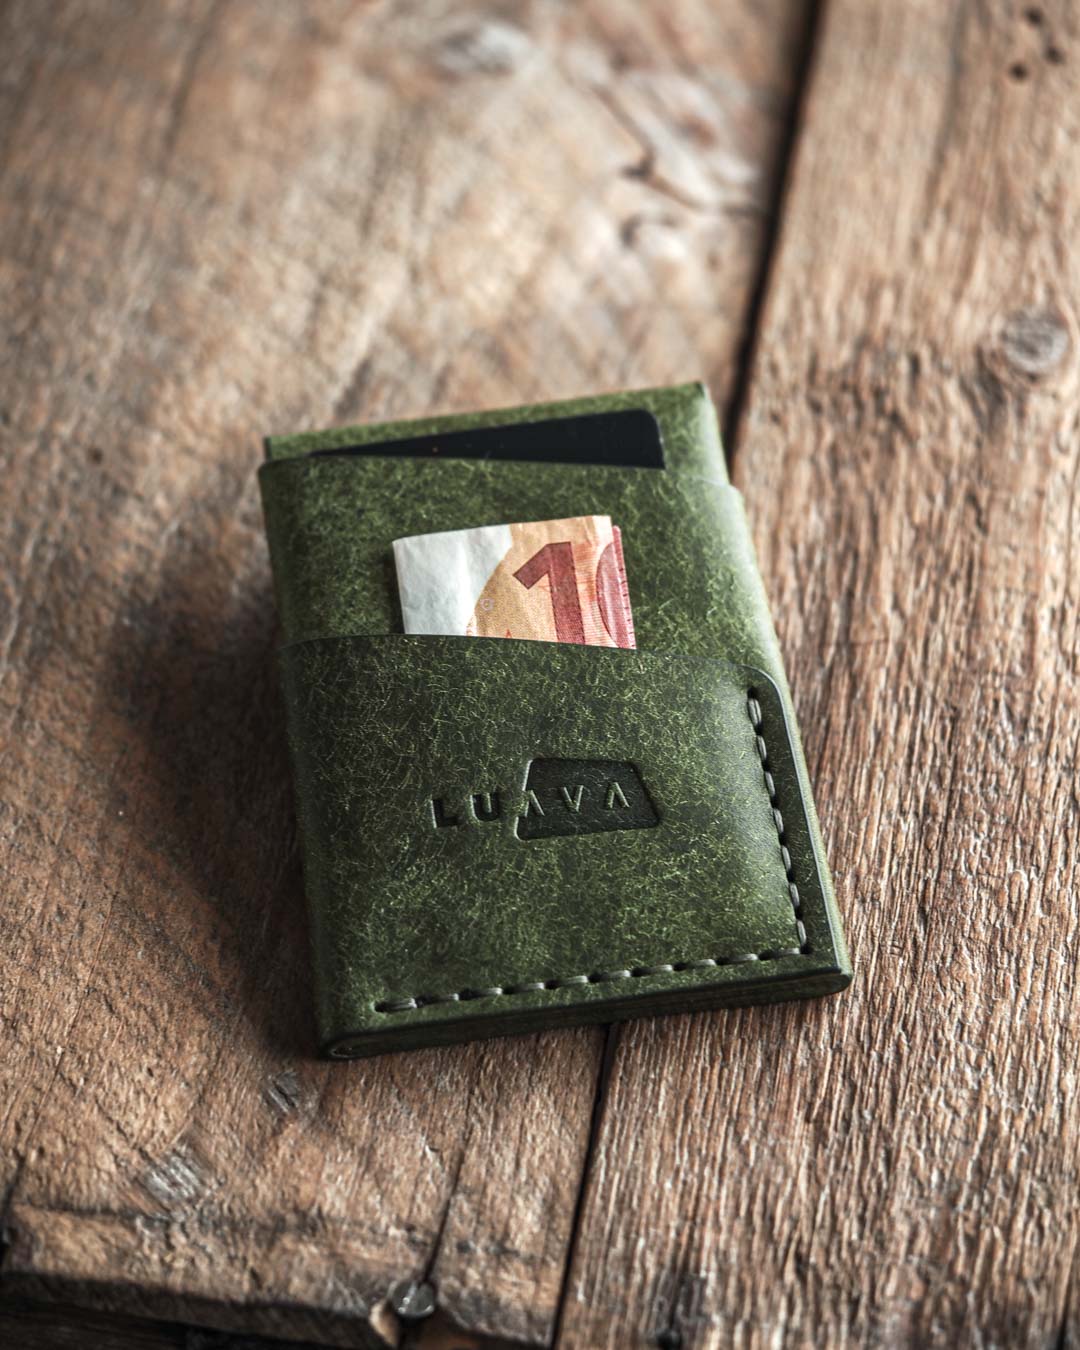 Luava handmade leather wallet Overfold pine back